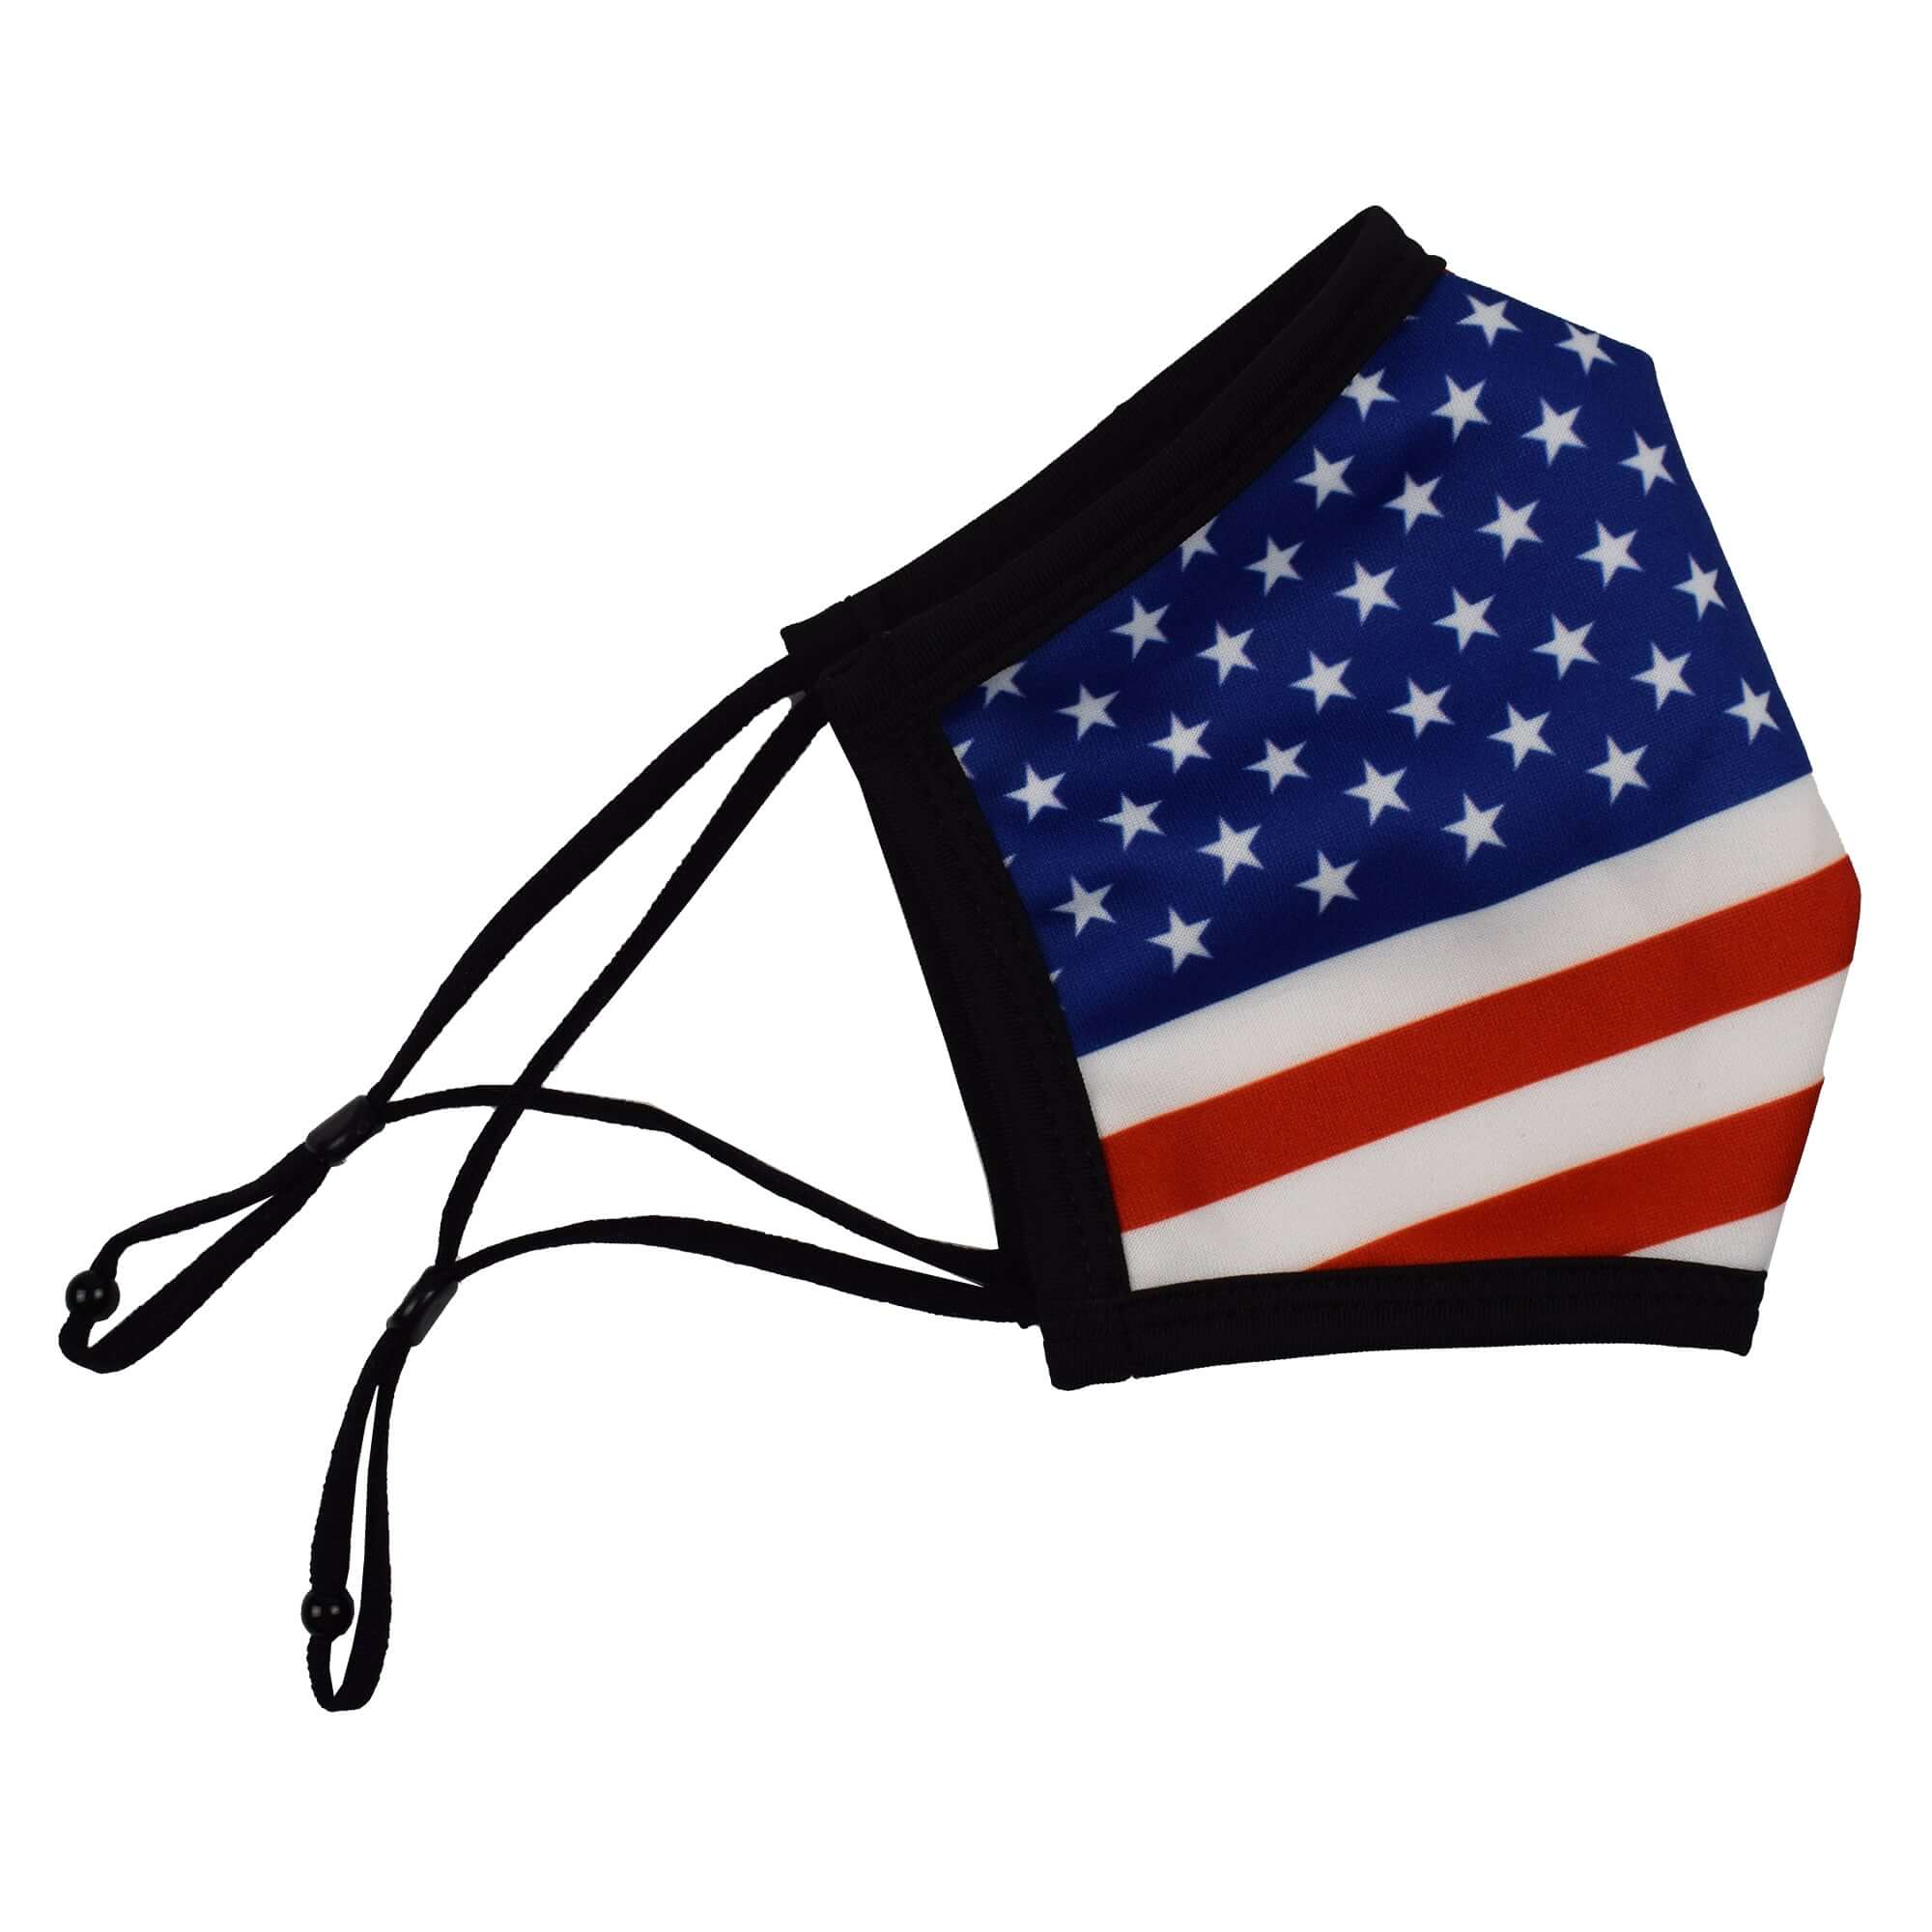 cloth face covering with american flag - the flag shirt